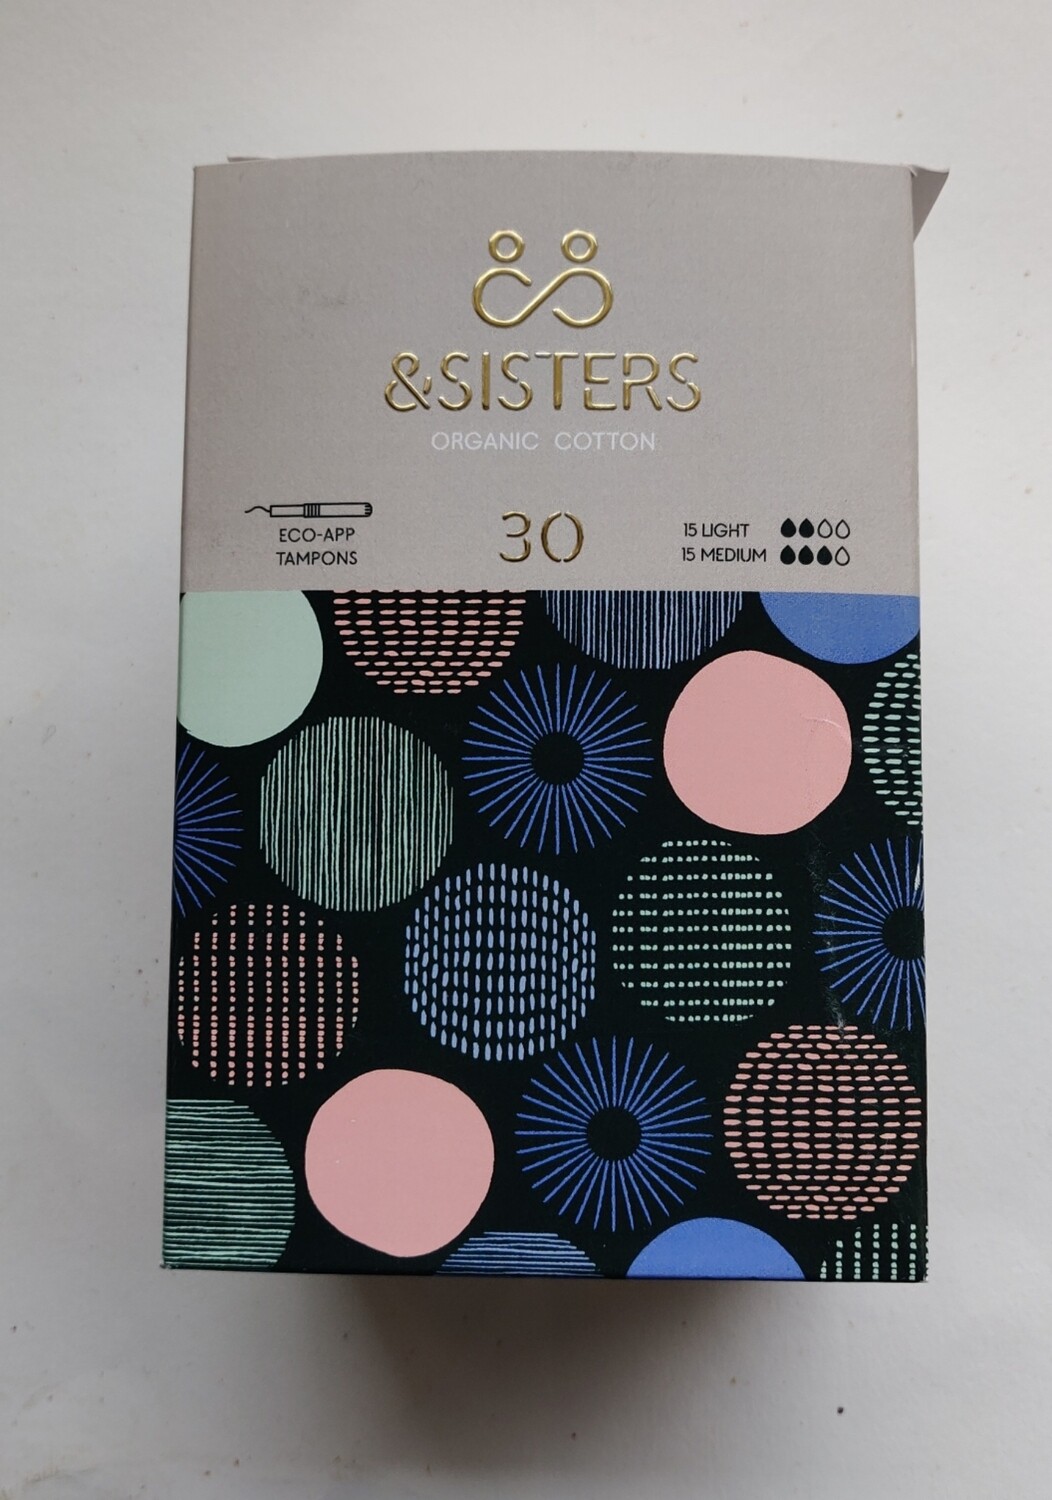 &Sisters Organic Cotton Tampons 30s